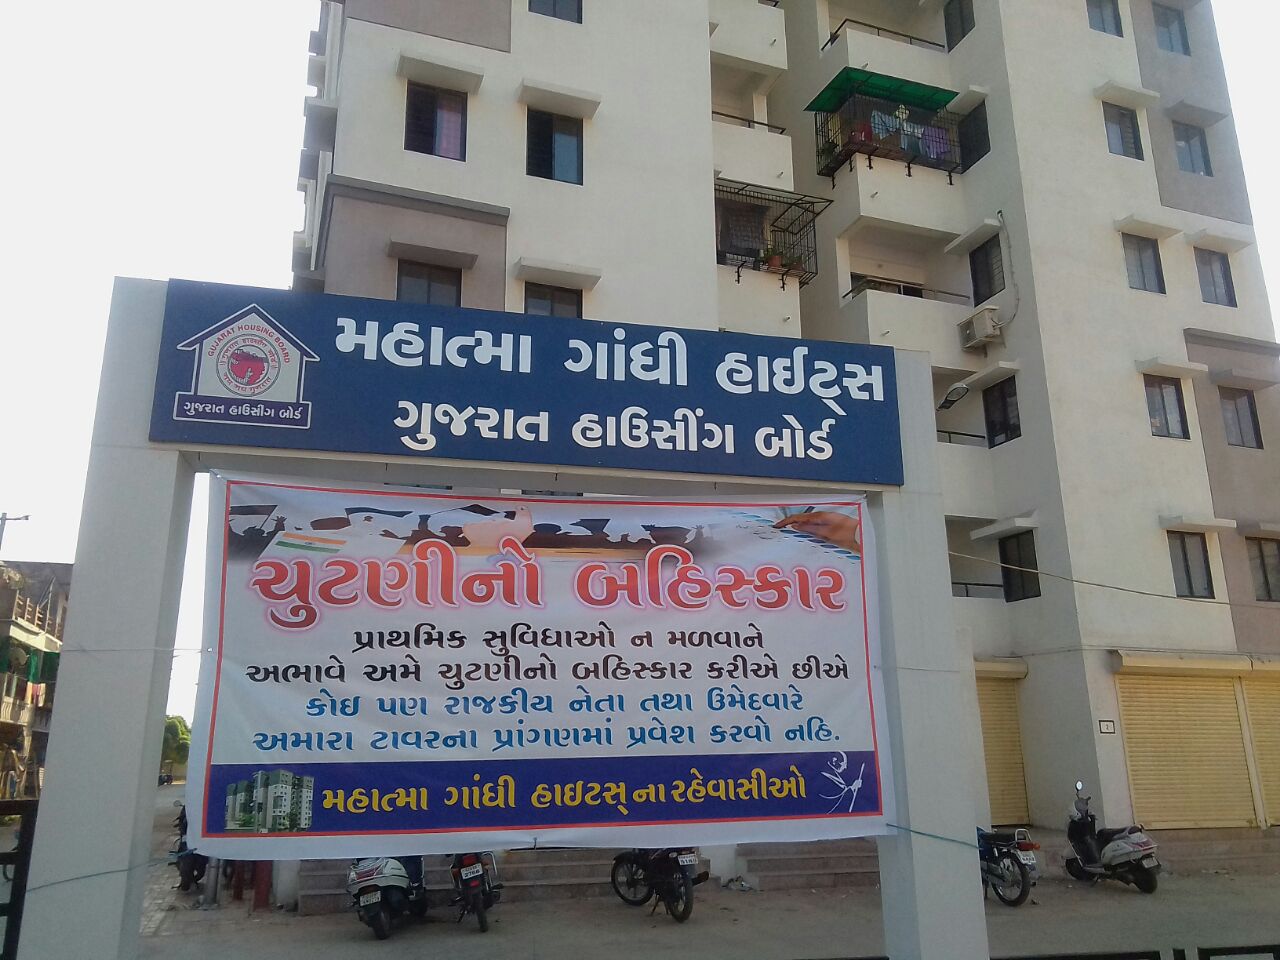 Banners opposing elections put up in residential areas in Vadodara